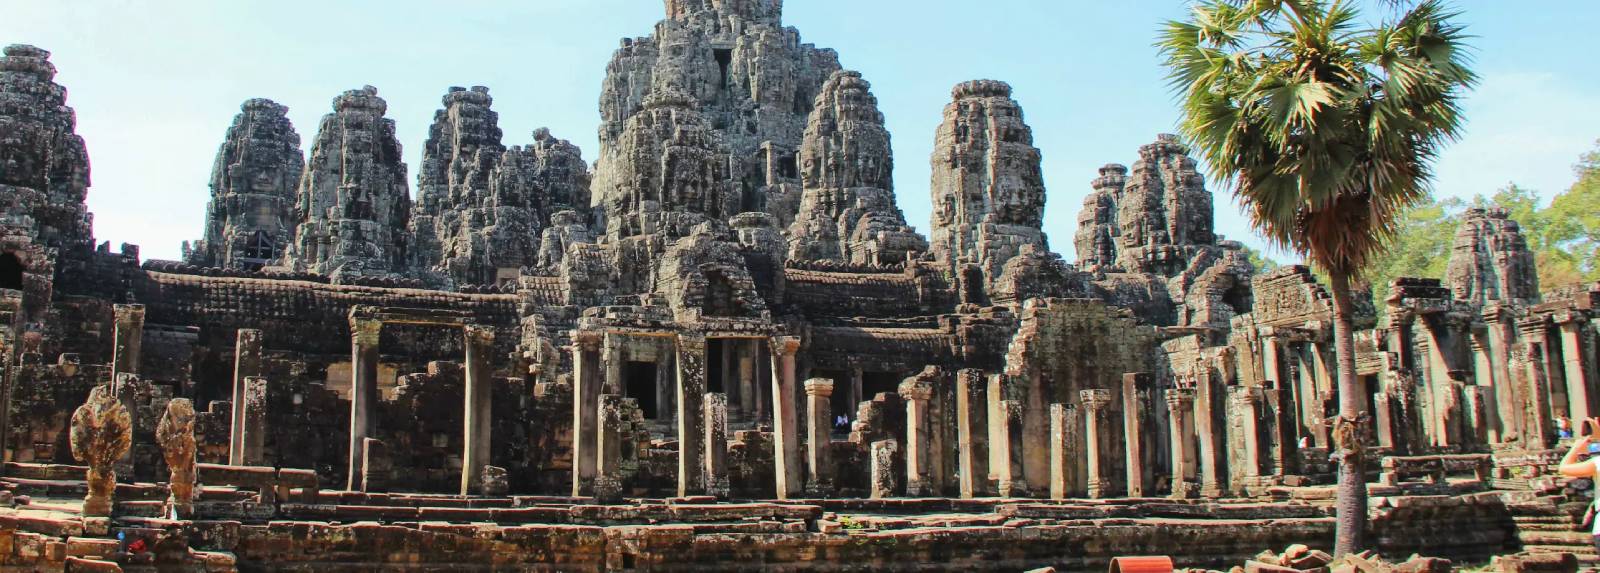 September Travel Guide to Cambodia